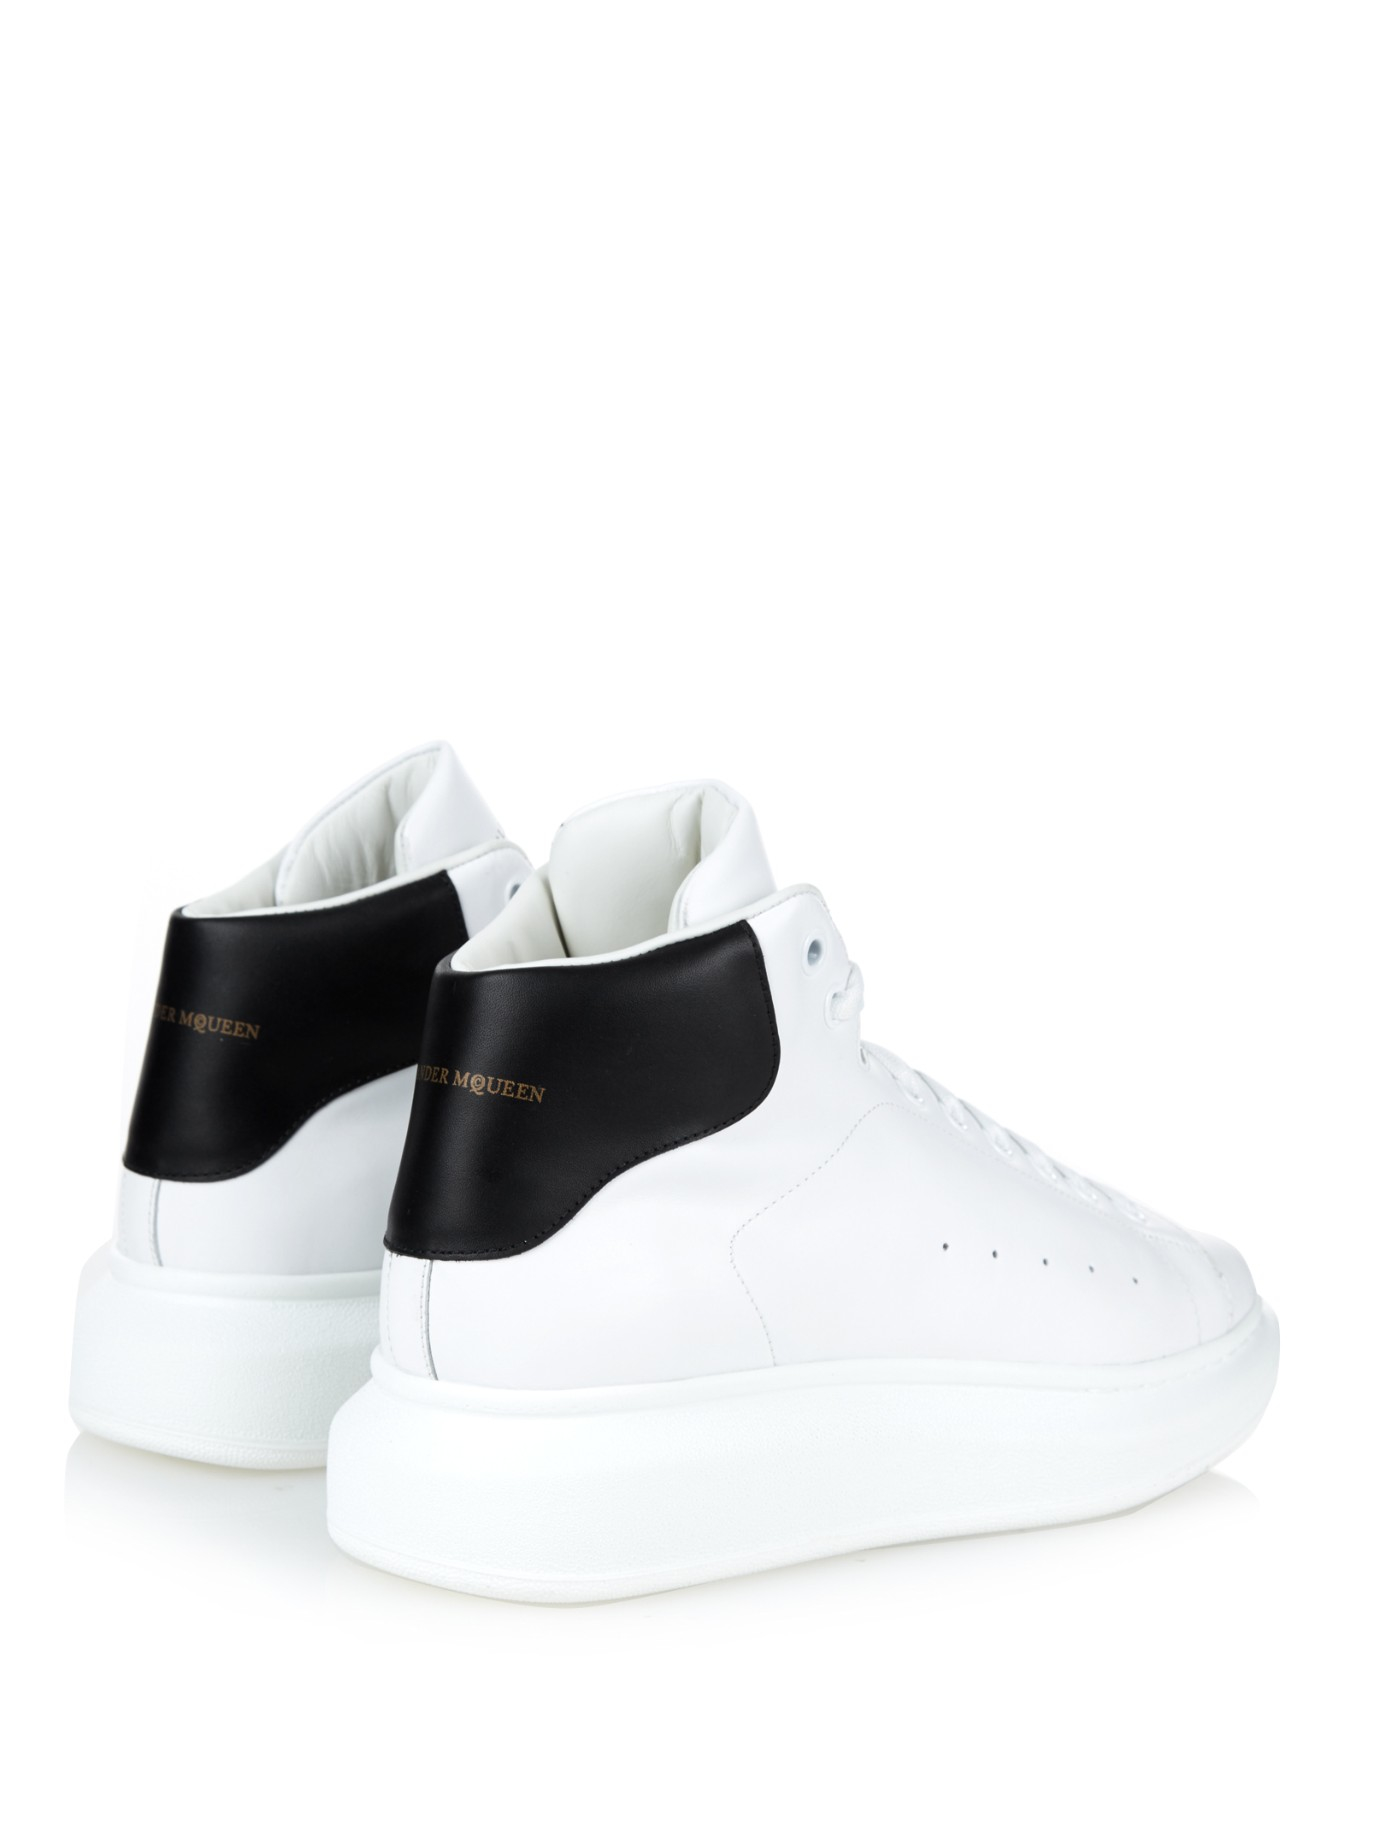 $450 NIB ALEXANDER MCQUEEN Men's White Leather High Top Shoes Sneakers 9-US 42